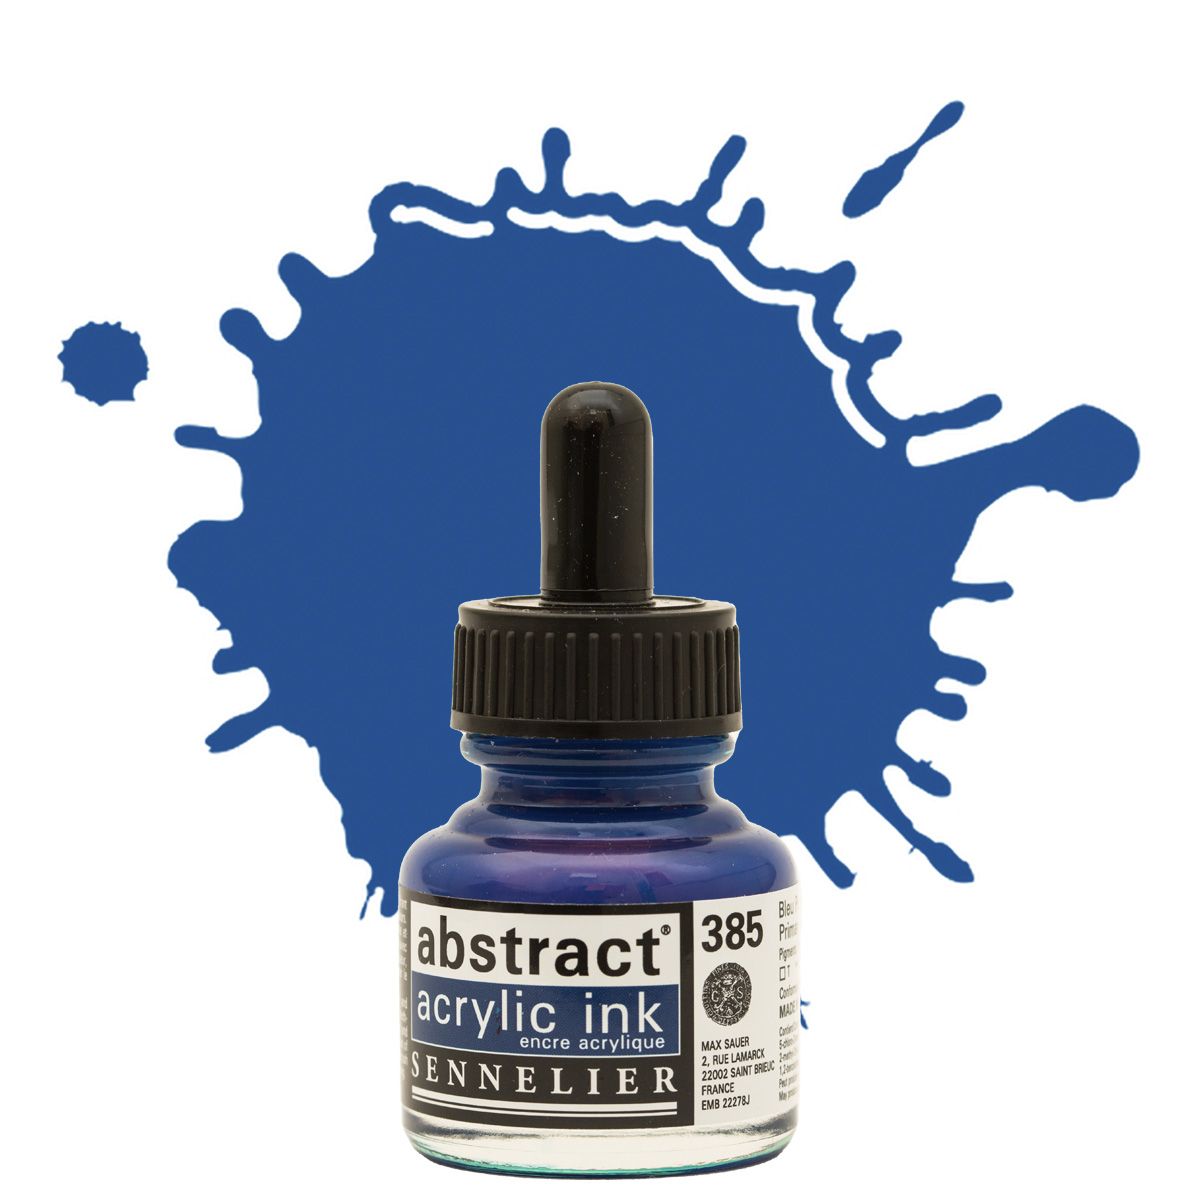 Sennelier Abstract Acrylic Ink - Primary Blue, 30ml